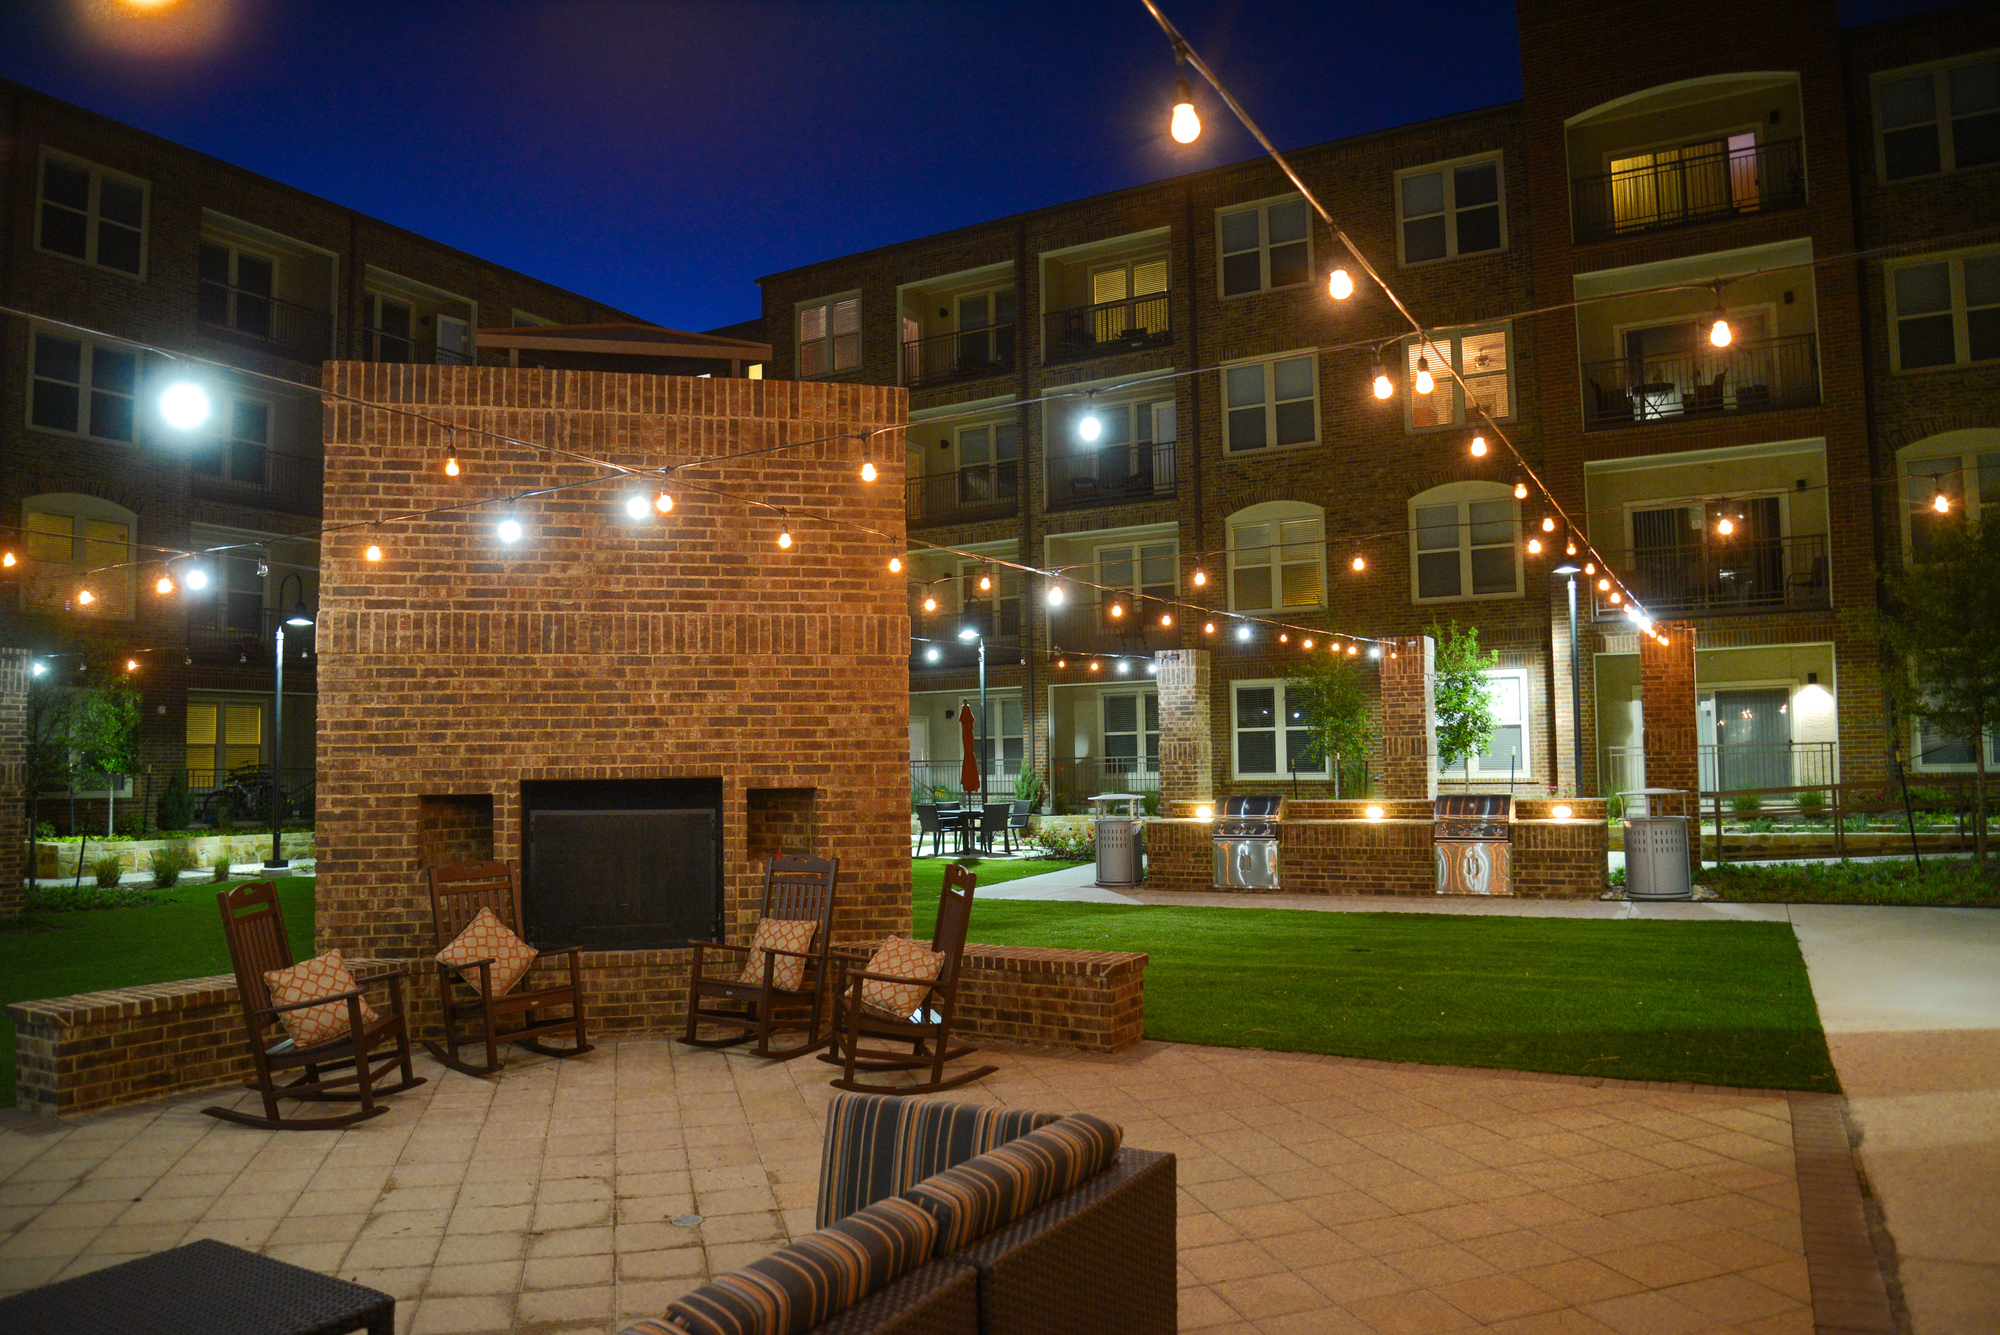 Community courtyard and outdoor kitchen with gas grills and rocking chairs near firepit with festival lights